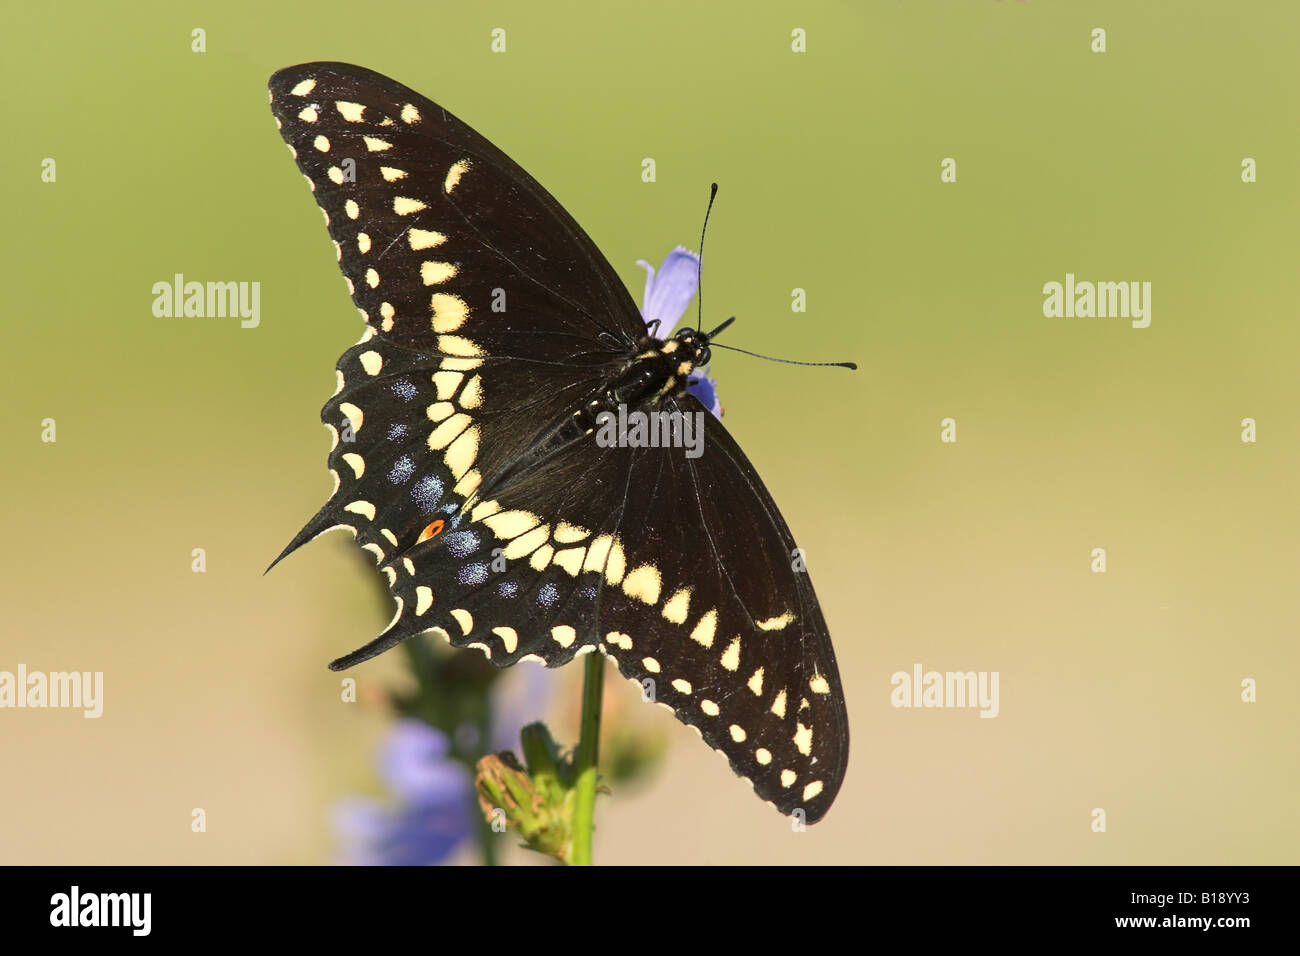 A Black Swallowtail butterfly (Papilio polyxenes) on a Chicory plant in Etobicoke, Ontario, Canada. Stock Photo